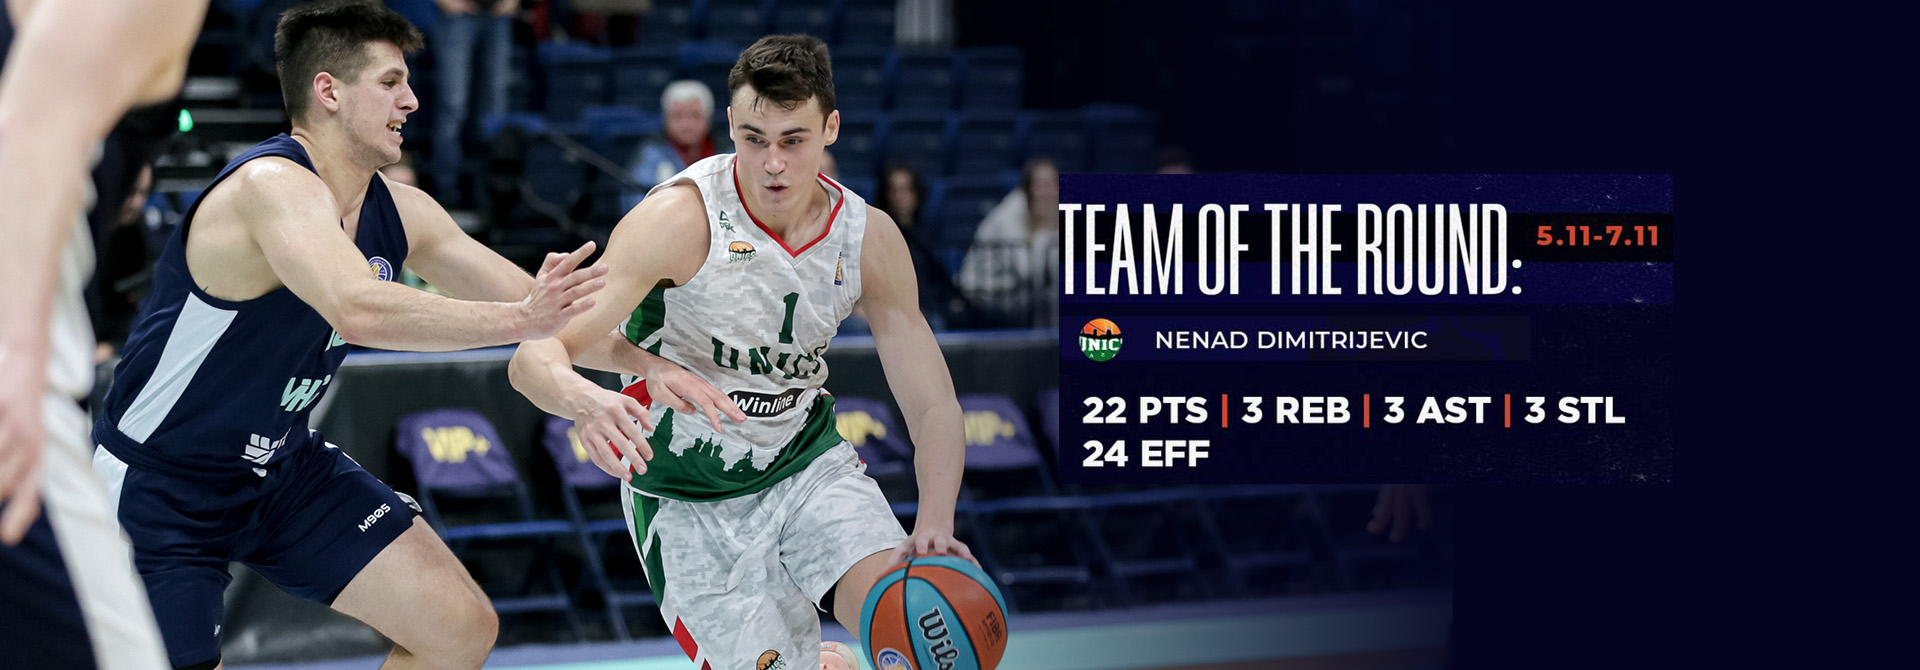 Nenad Dimitrijevic was included in the All-VTB Team of the Week!